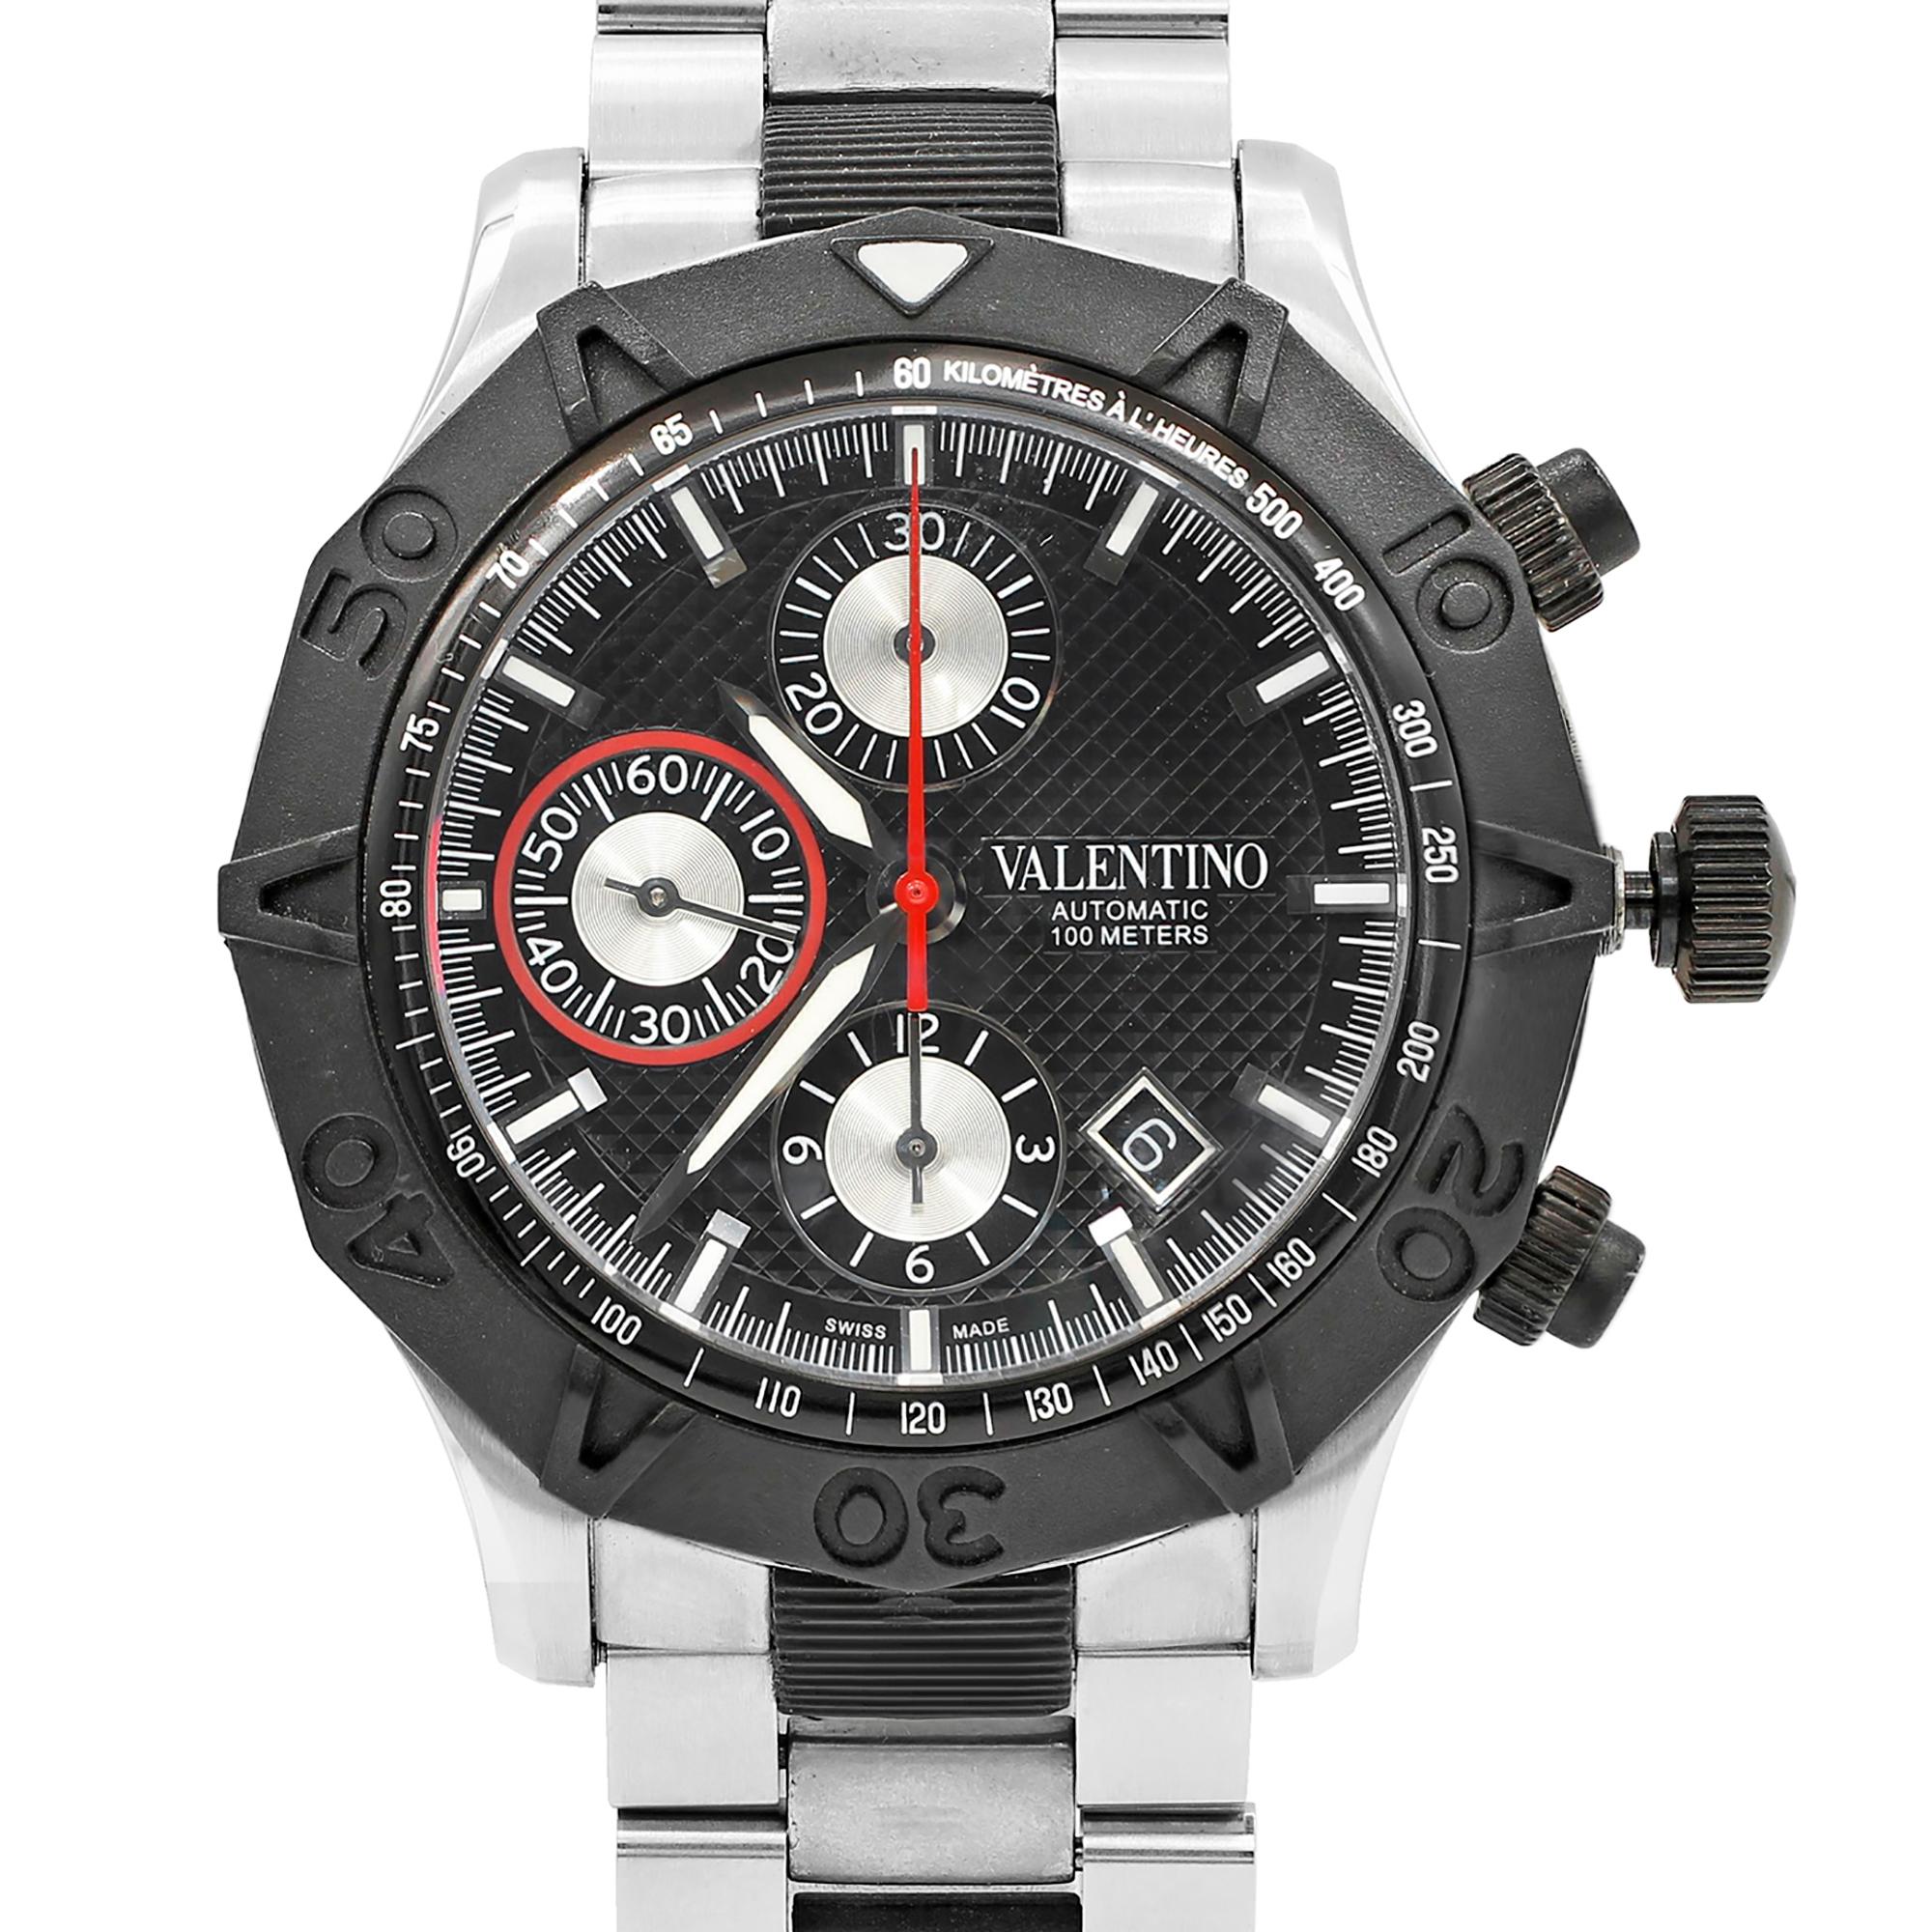 This pre-owned Valentino  N/A V40LCA9R909-S09R is a beautiful men's timepiece that is powered by mechanical (automatic) movement which is cased in a stainless steel case. It has a round shape face, chronograph, date indicator, small seconds subdial,